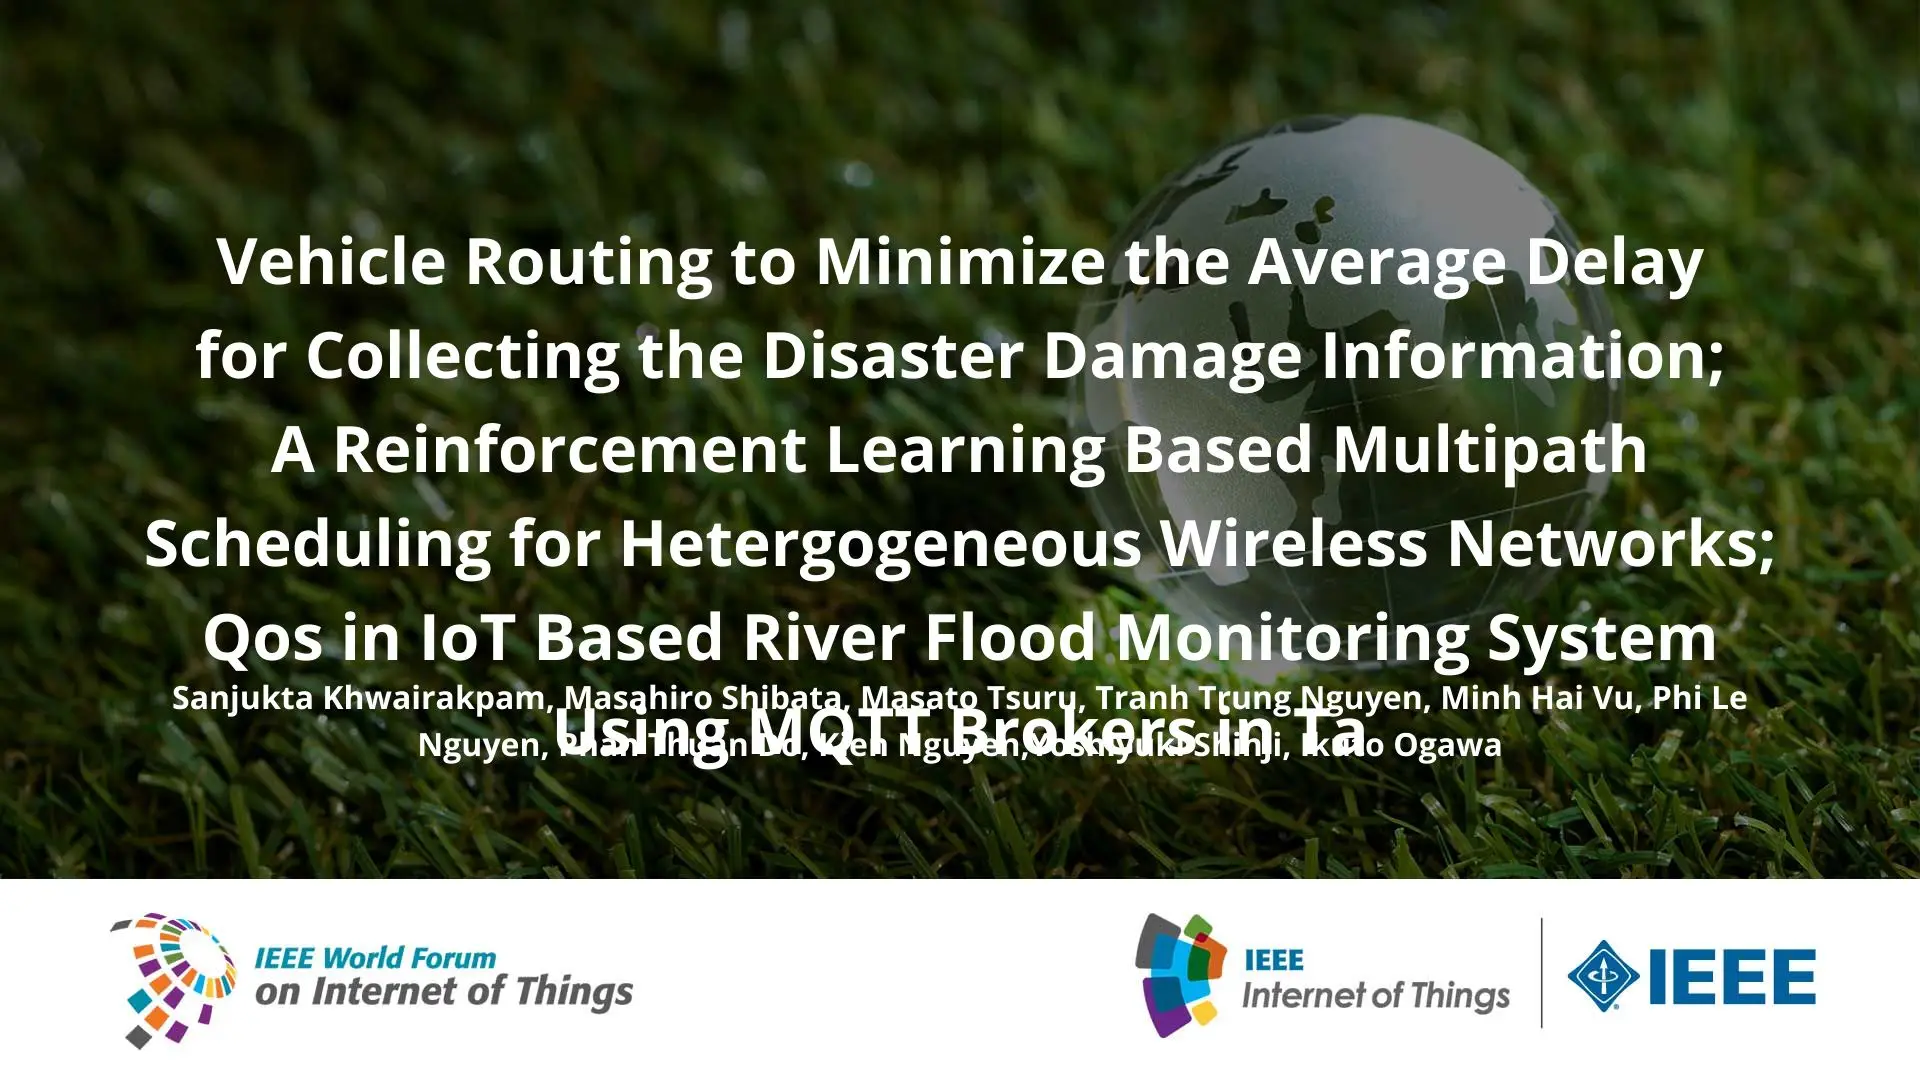 Vehicle Routing to Minimize the Average Delay for Collecting the Disaster Damage Information; A Reinforcement Learning Based Multipath Scheduling for Hetergogeneous Wireless Networks; Qos in IoT Based River Flood Monitoring System Using MQTT Brokers in Ta